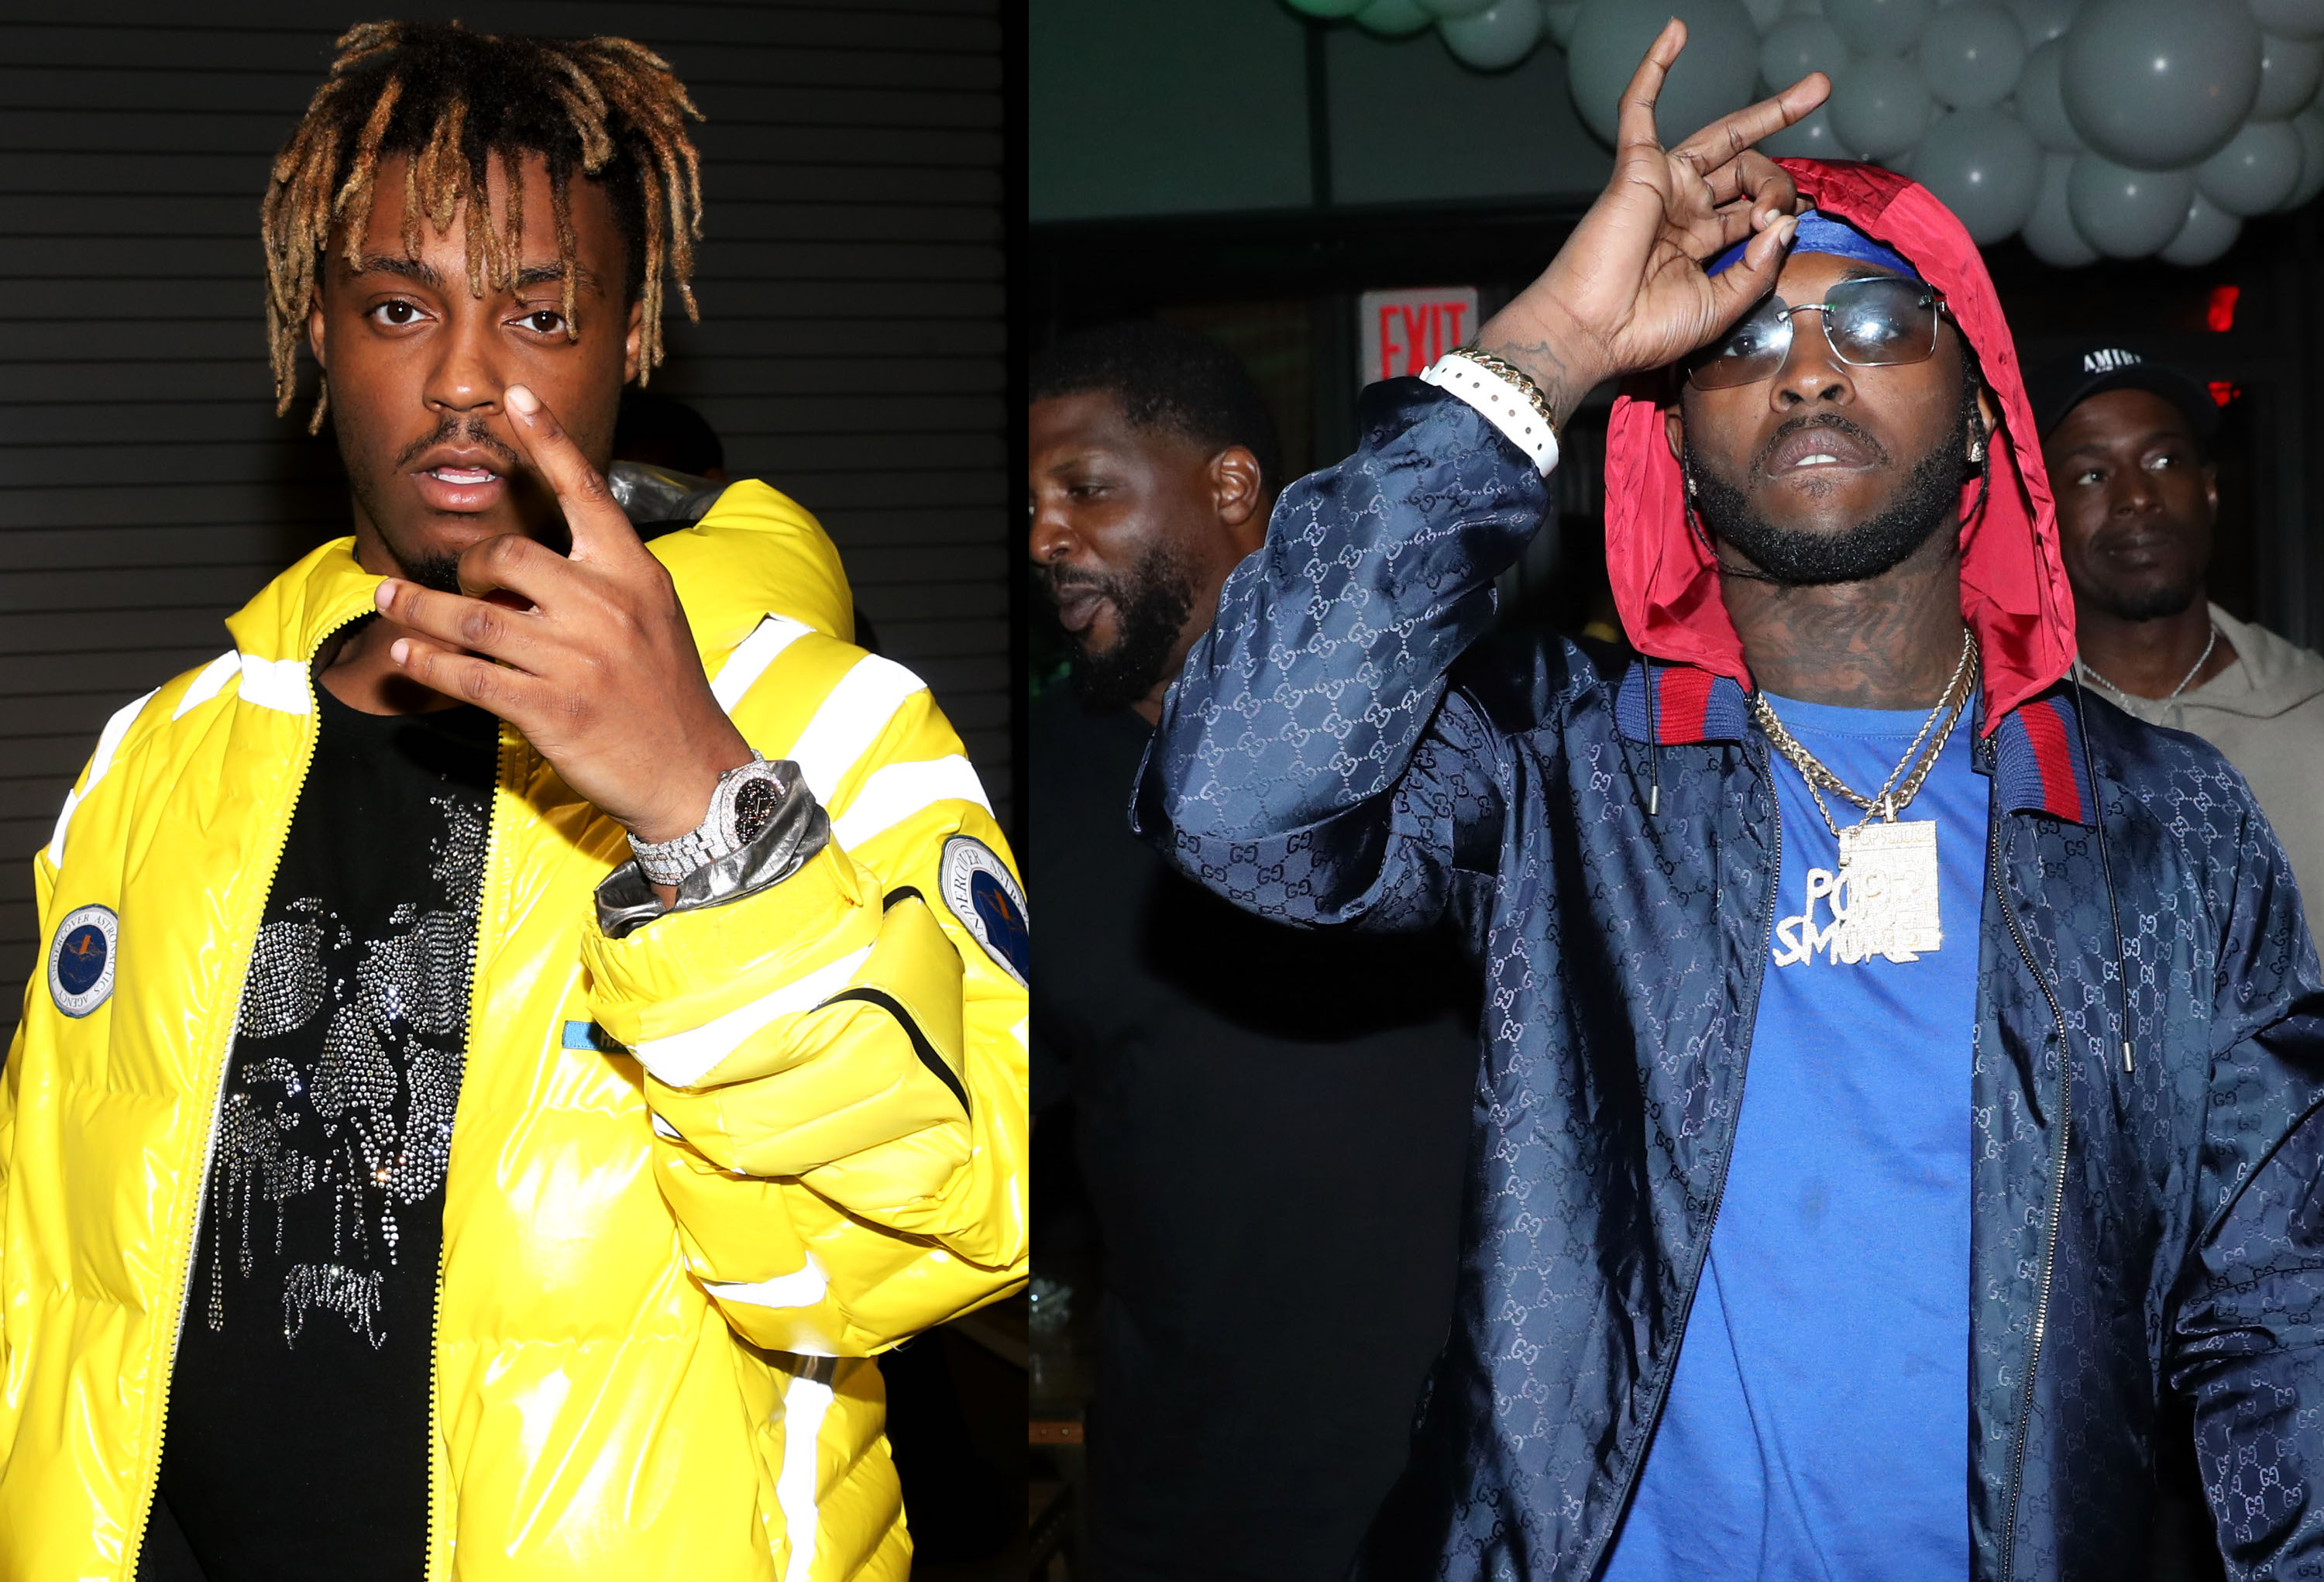 Juice Wrld songs dominate Spotify, Apple Music after rapper's death